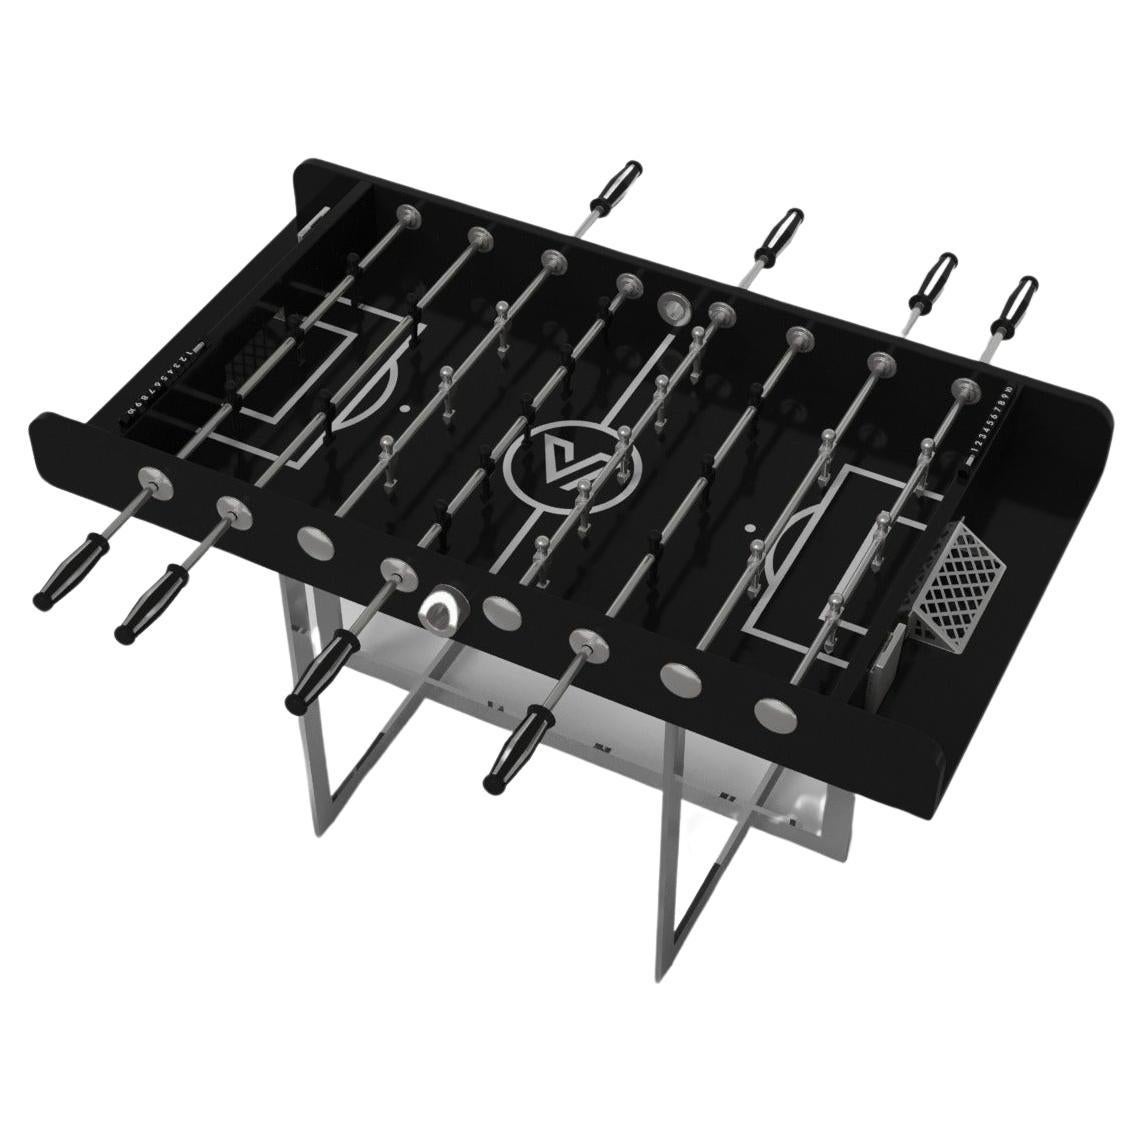 Elevate Customs Beso Foosball Tables/Solid Pantone Black Color in 5'-Made in USA For Sale